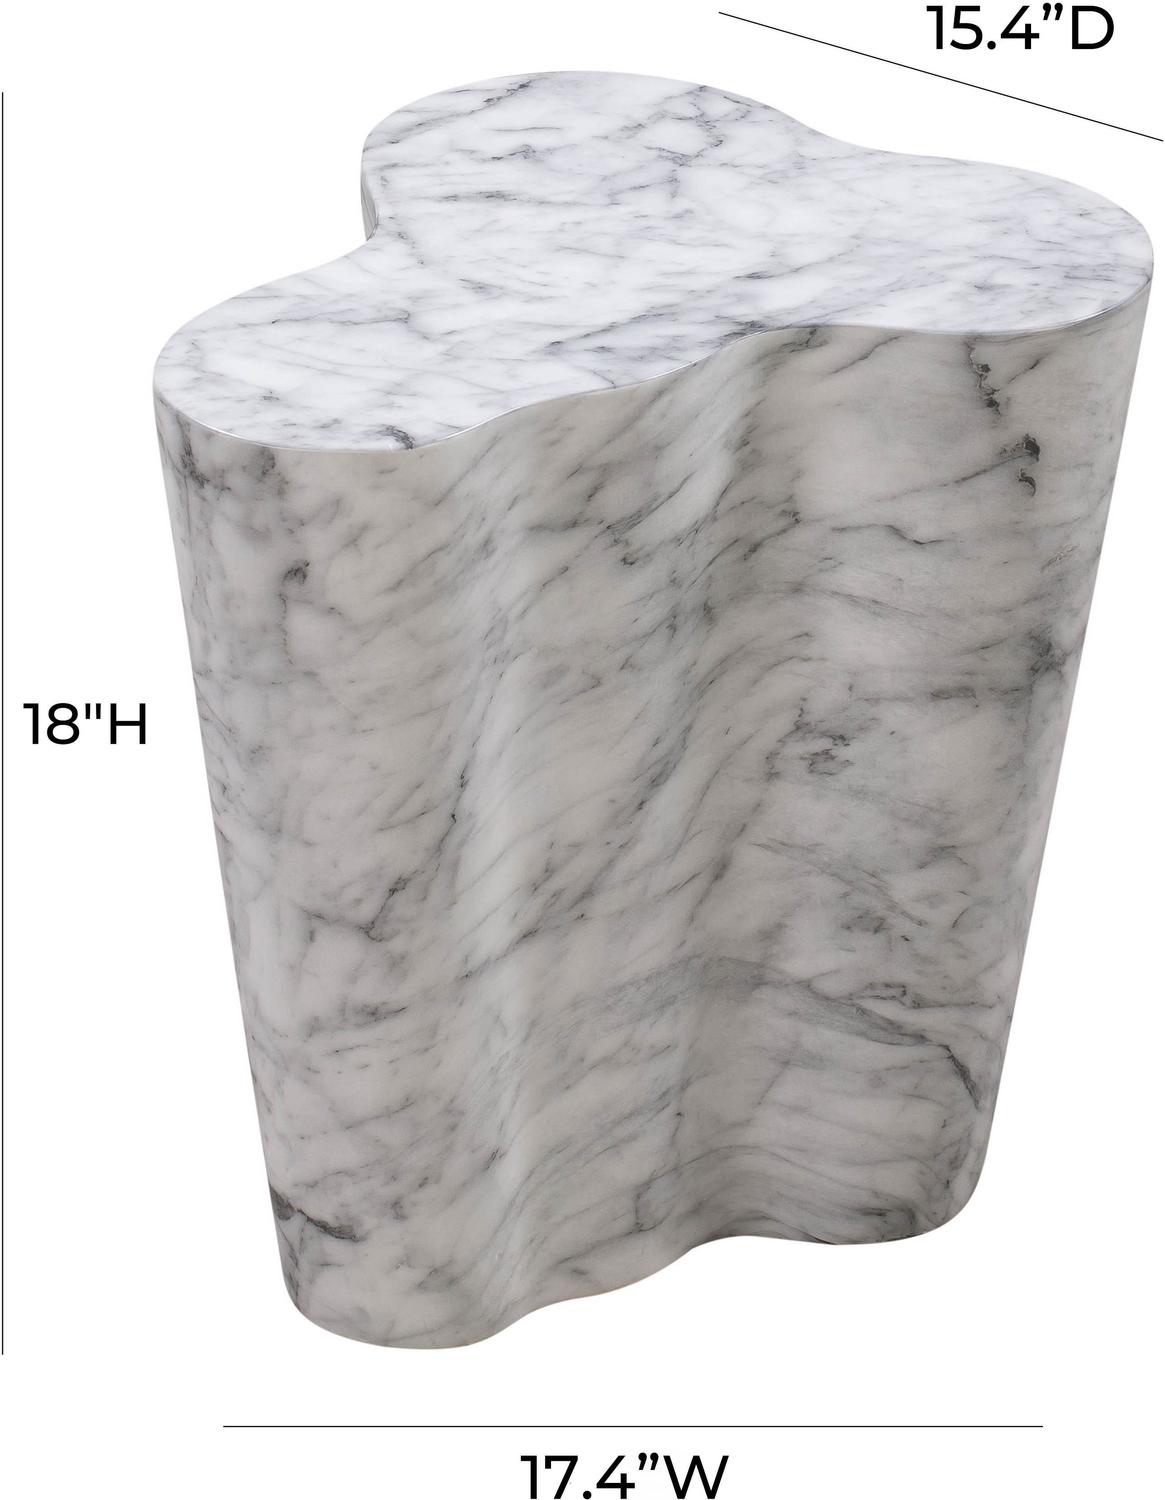 mid century modern console Contemporary Design Furniture Side Tables White Marble